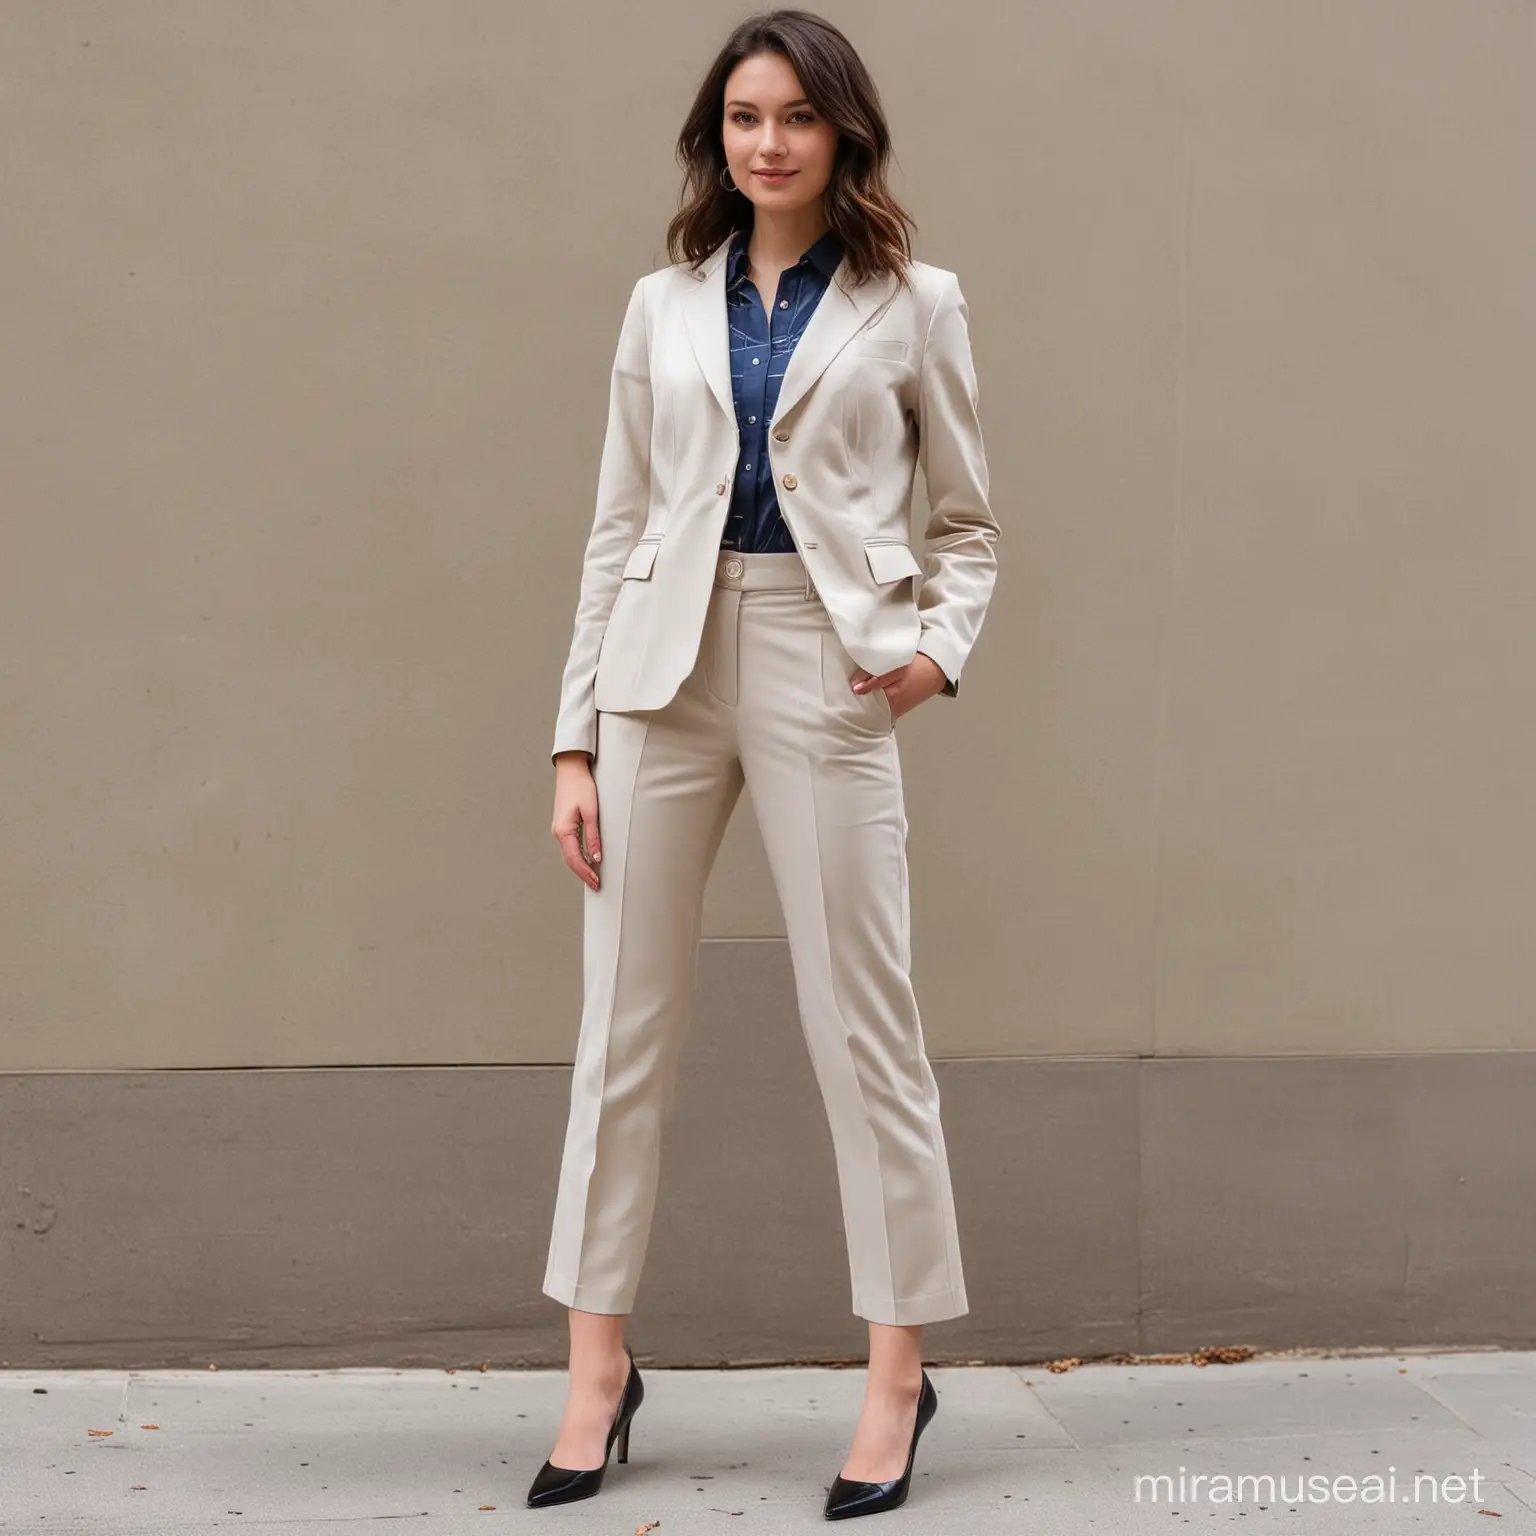 Professional Womens Internship Outfit ButtonDown Blouse Structured Blazer Tailored Trousers and LowHeeled Pumps